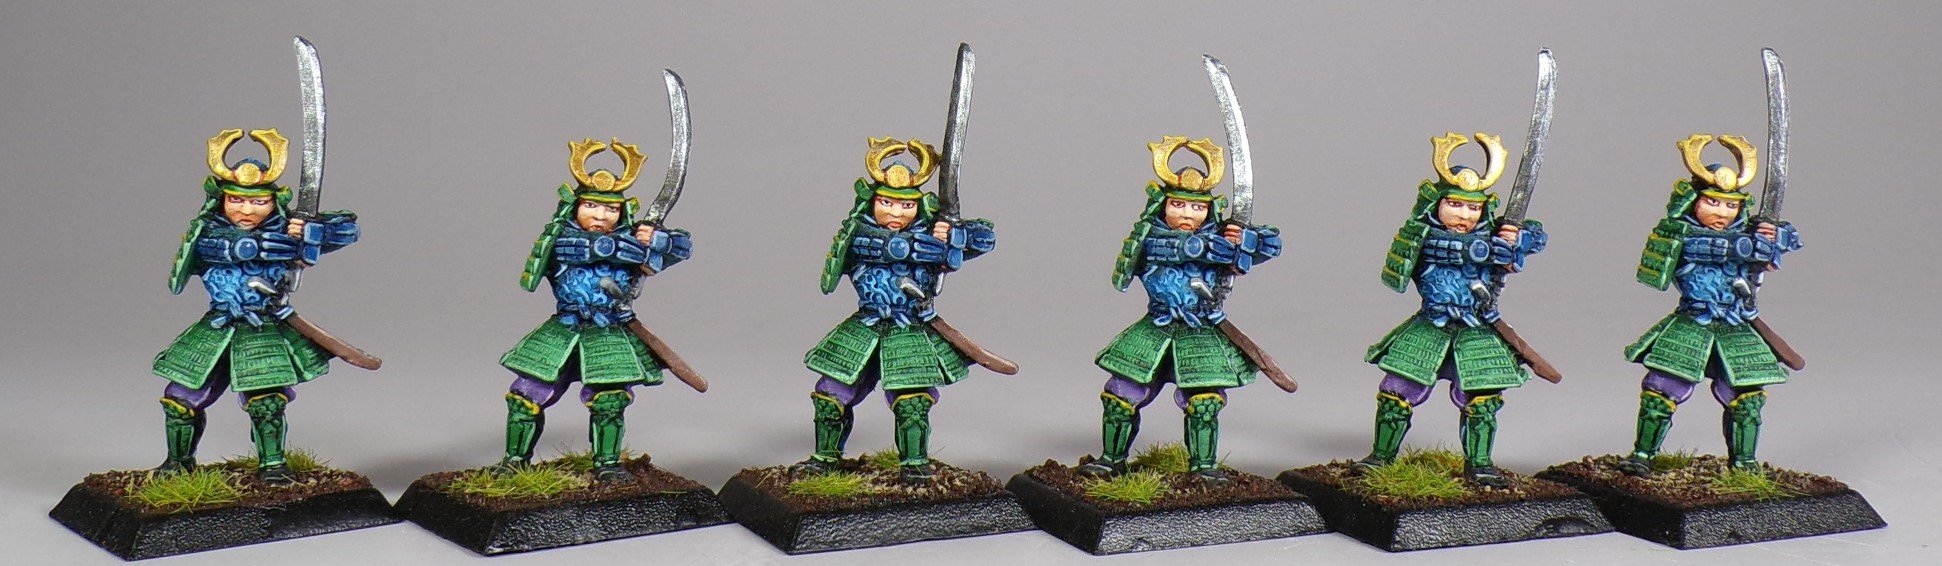 L5R Legend of the Five Rings Miniature Painting Service Paintedfigs (13).jpg